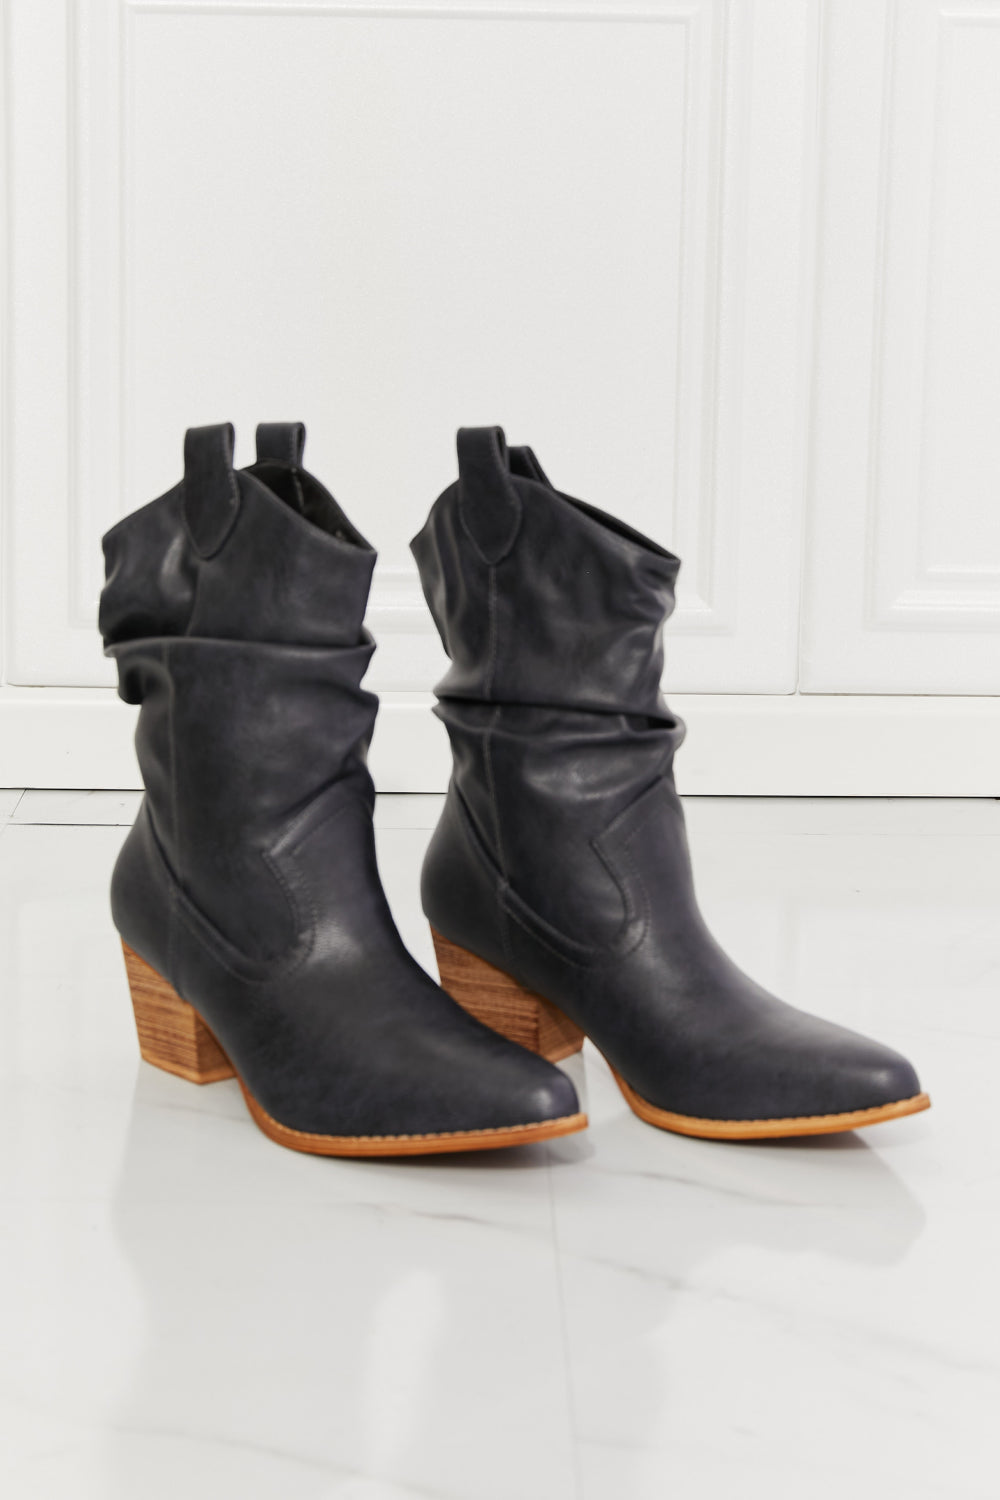 Better in Texas Scrunch Cowboy Boots in Navy - Copper + Rose